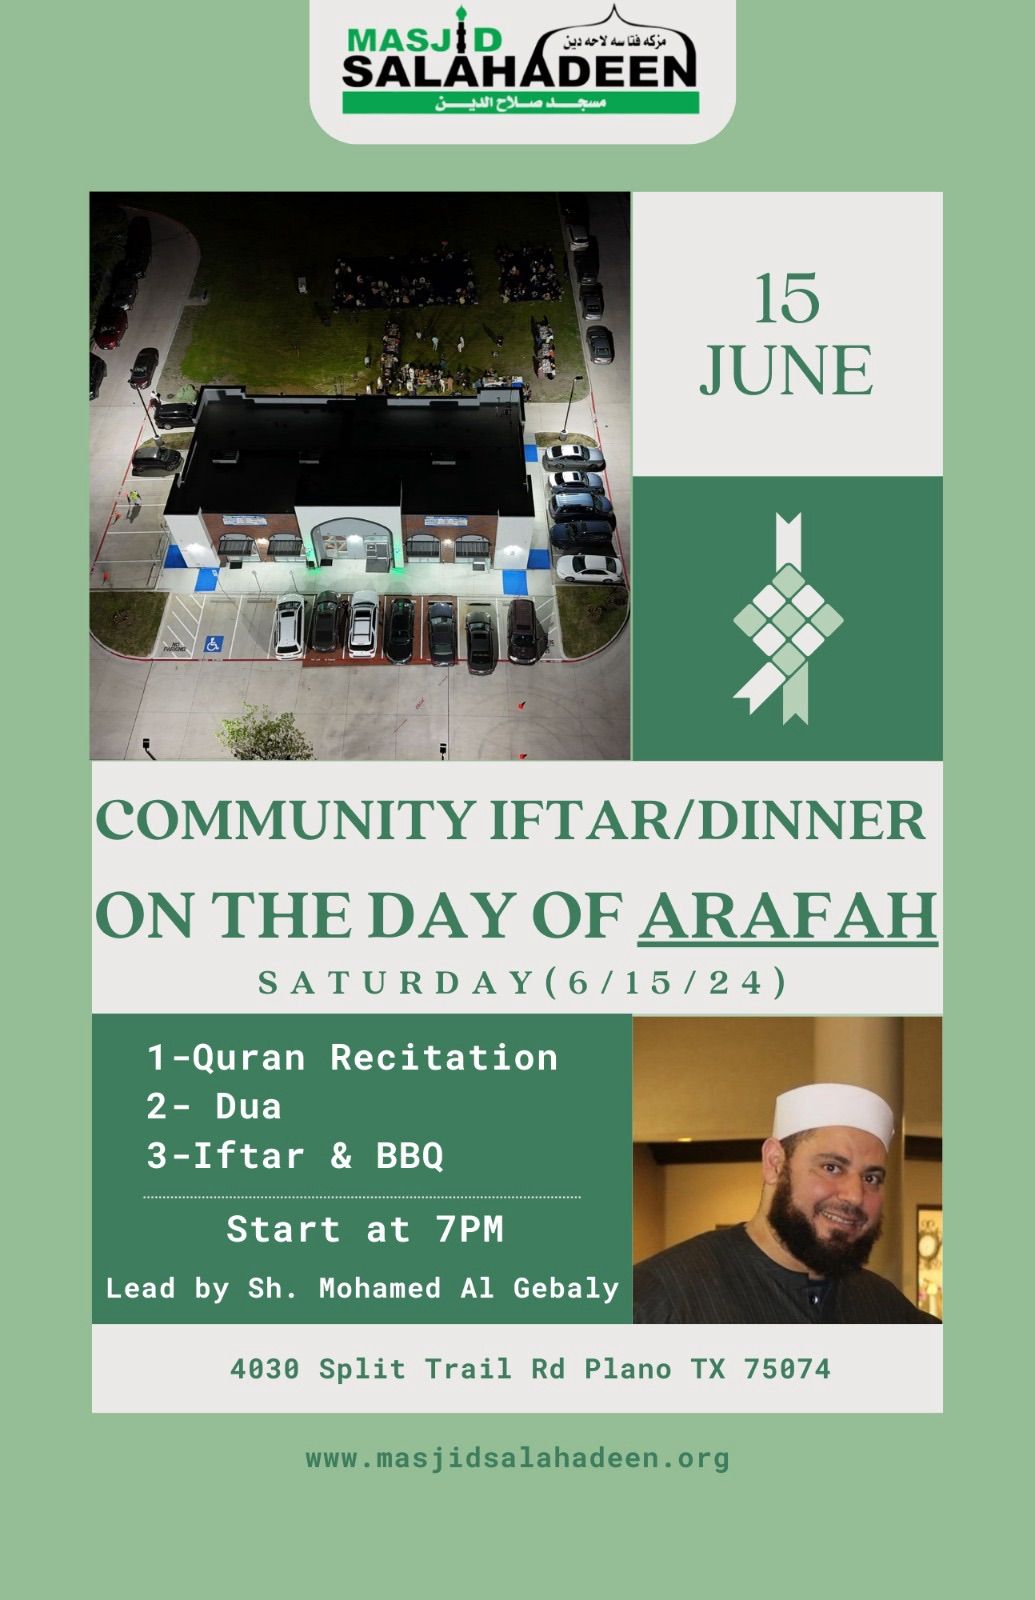 Join Us for a Special Community Iftar\/Dinner on the Day of Arafah!